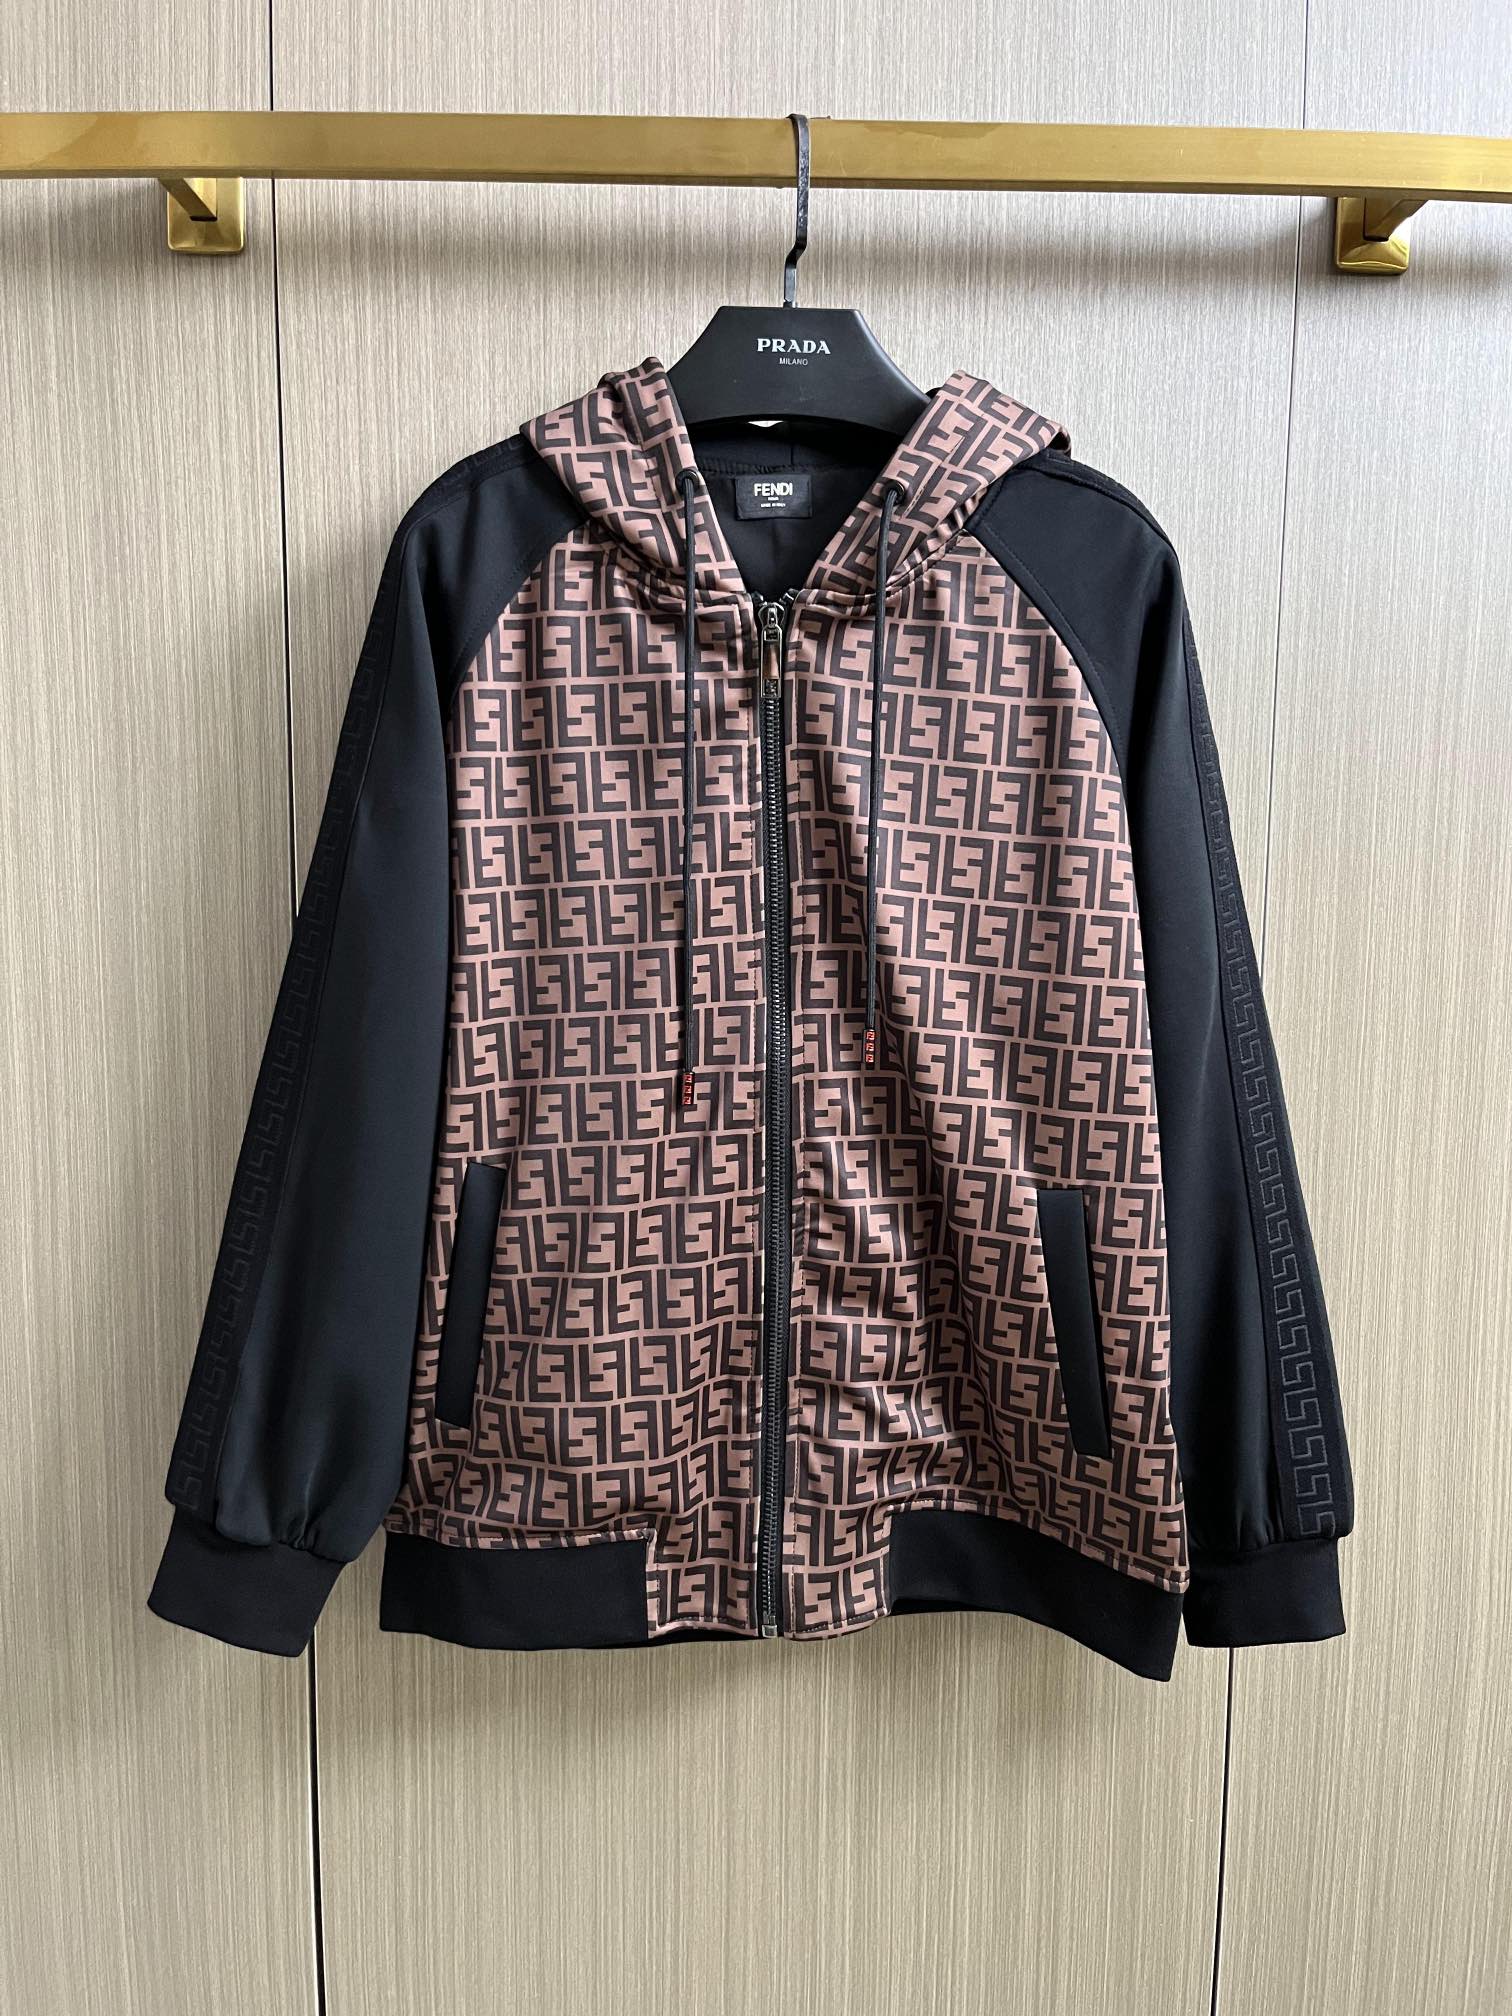 Fendi Clothing Coats & Jackets Men Fall/Winter Collection Casual